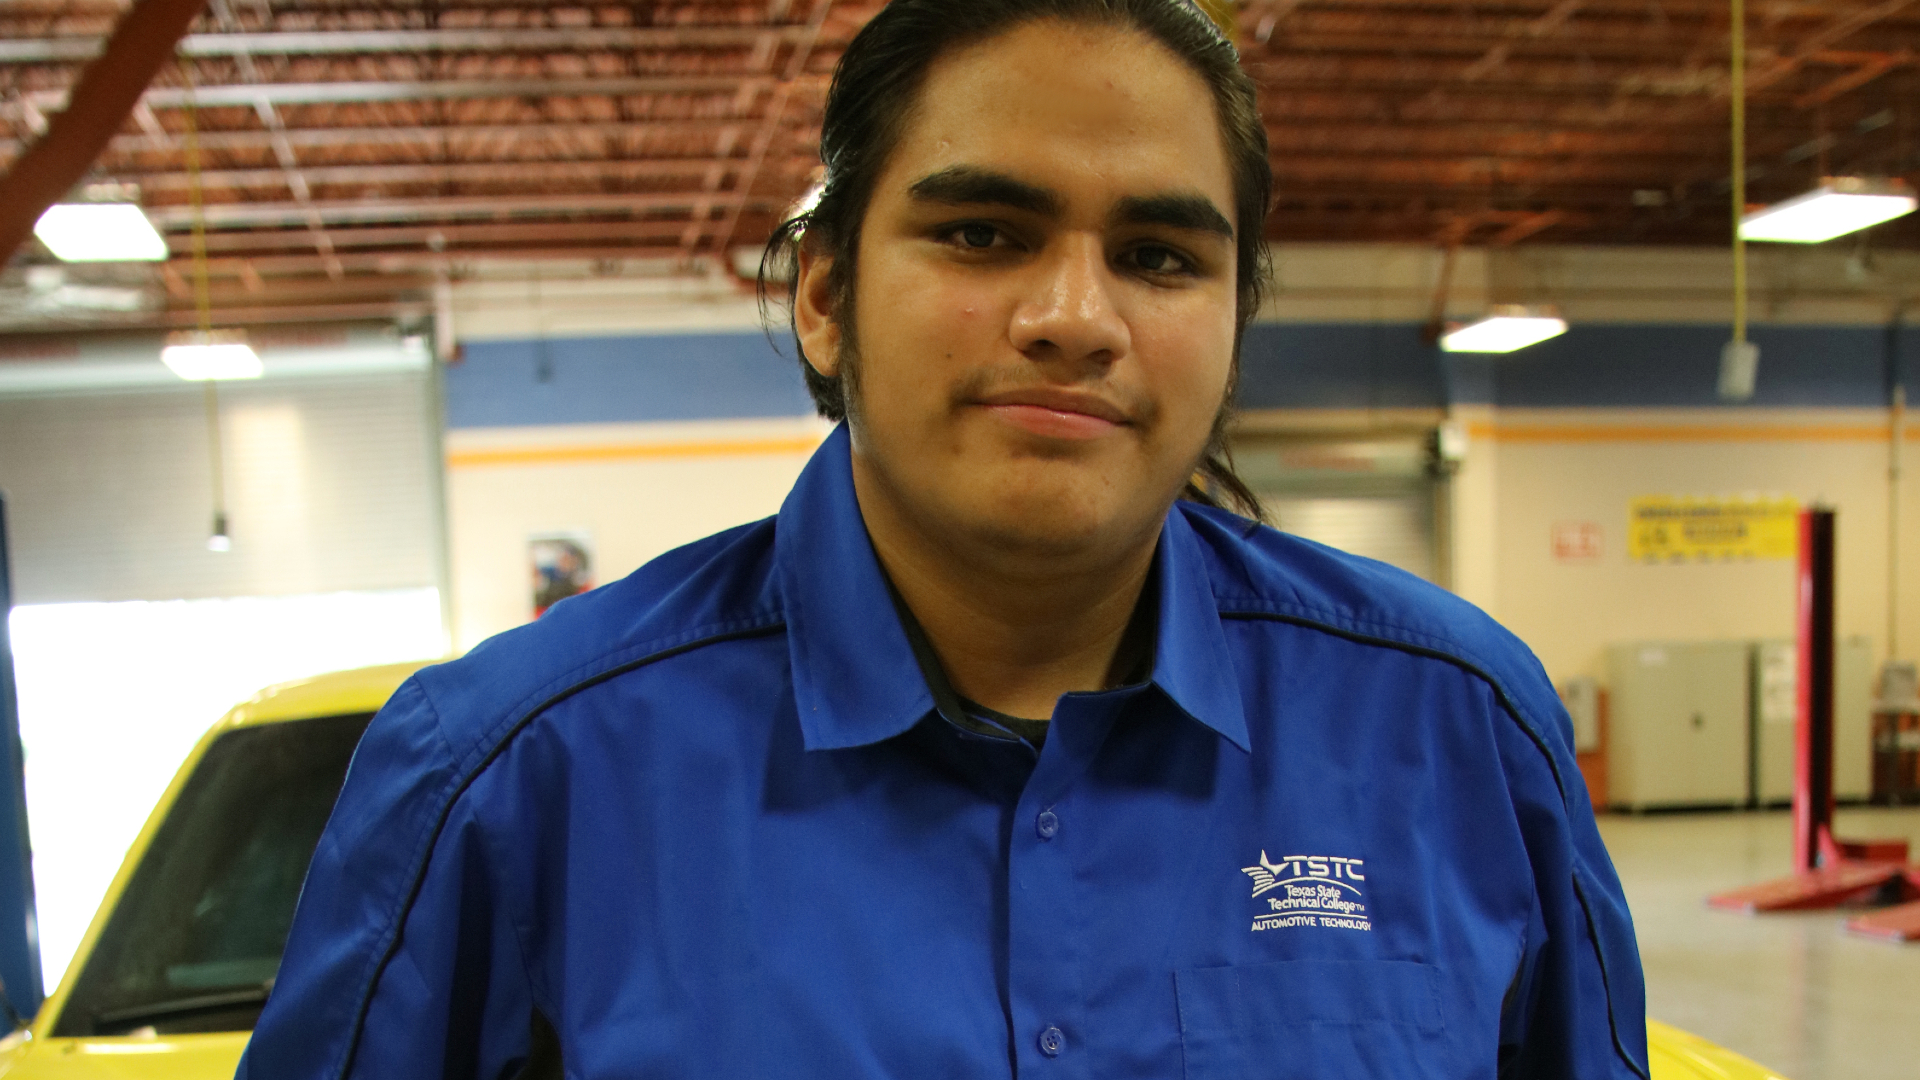 TSTC Automotive Technology student follows in grandfathers’ footsteps